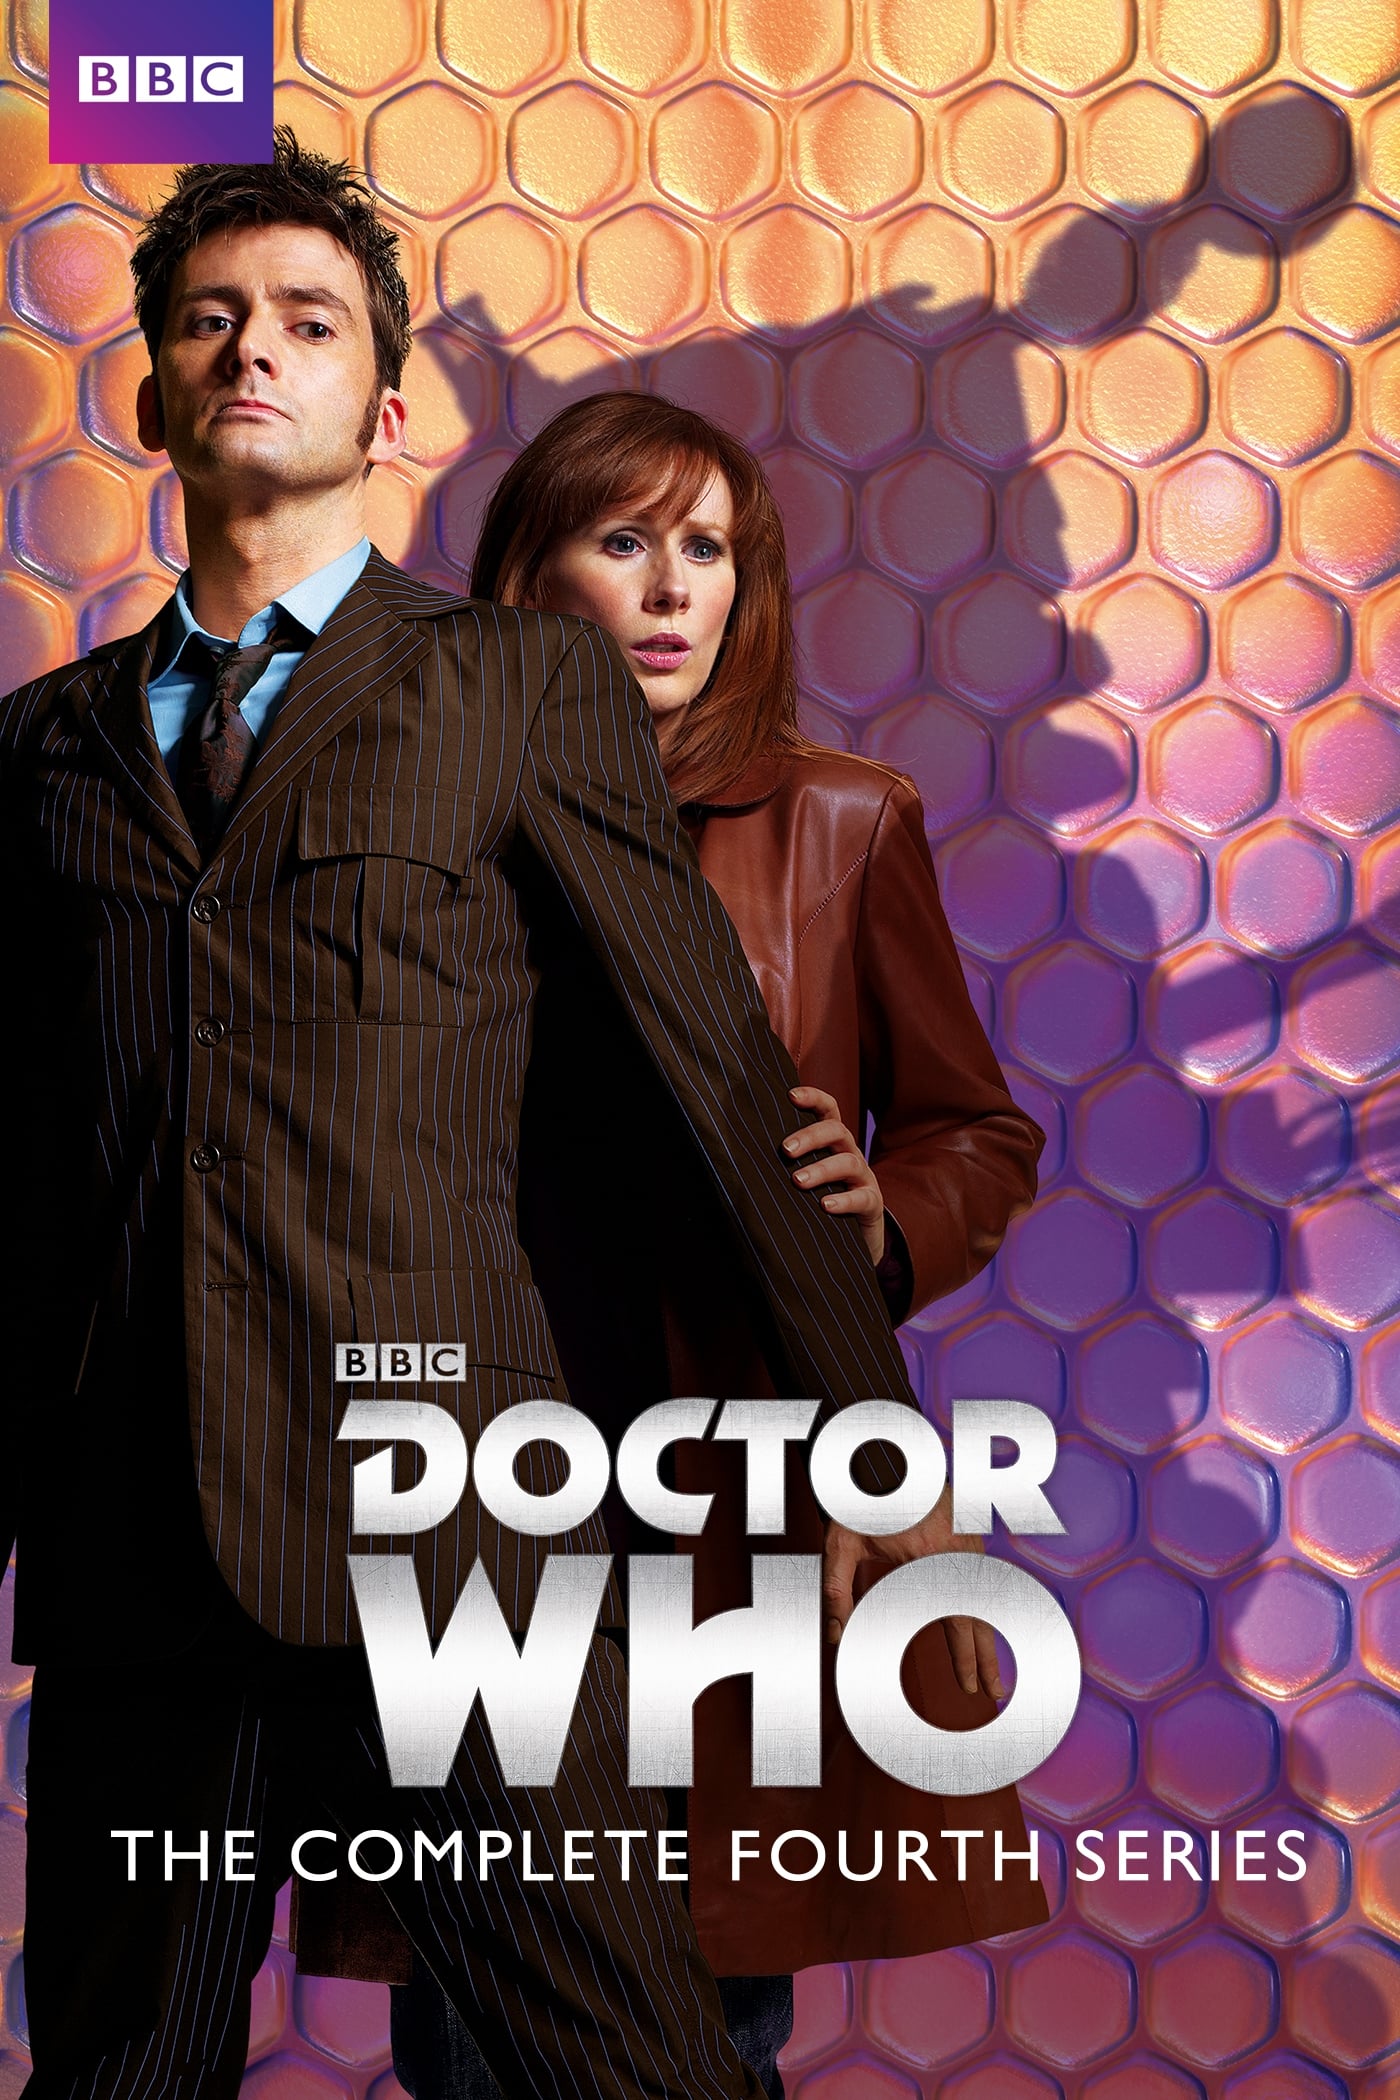 voir film Doctor Who streaming